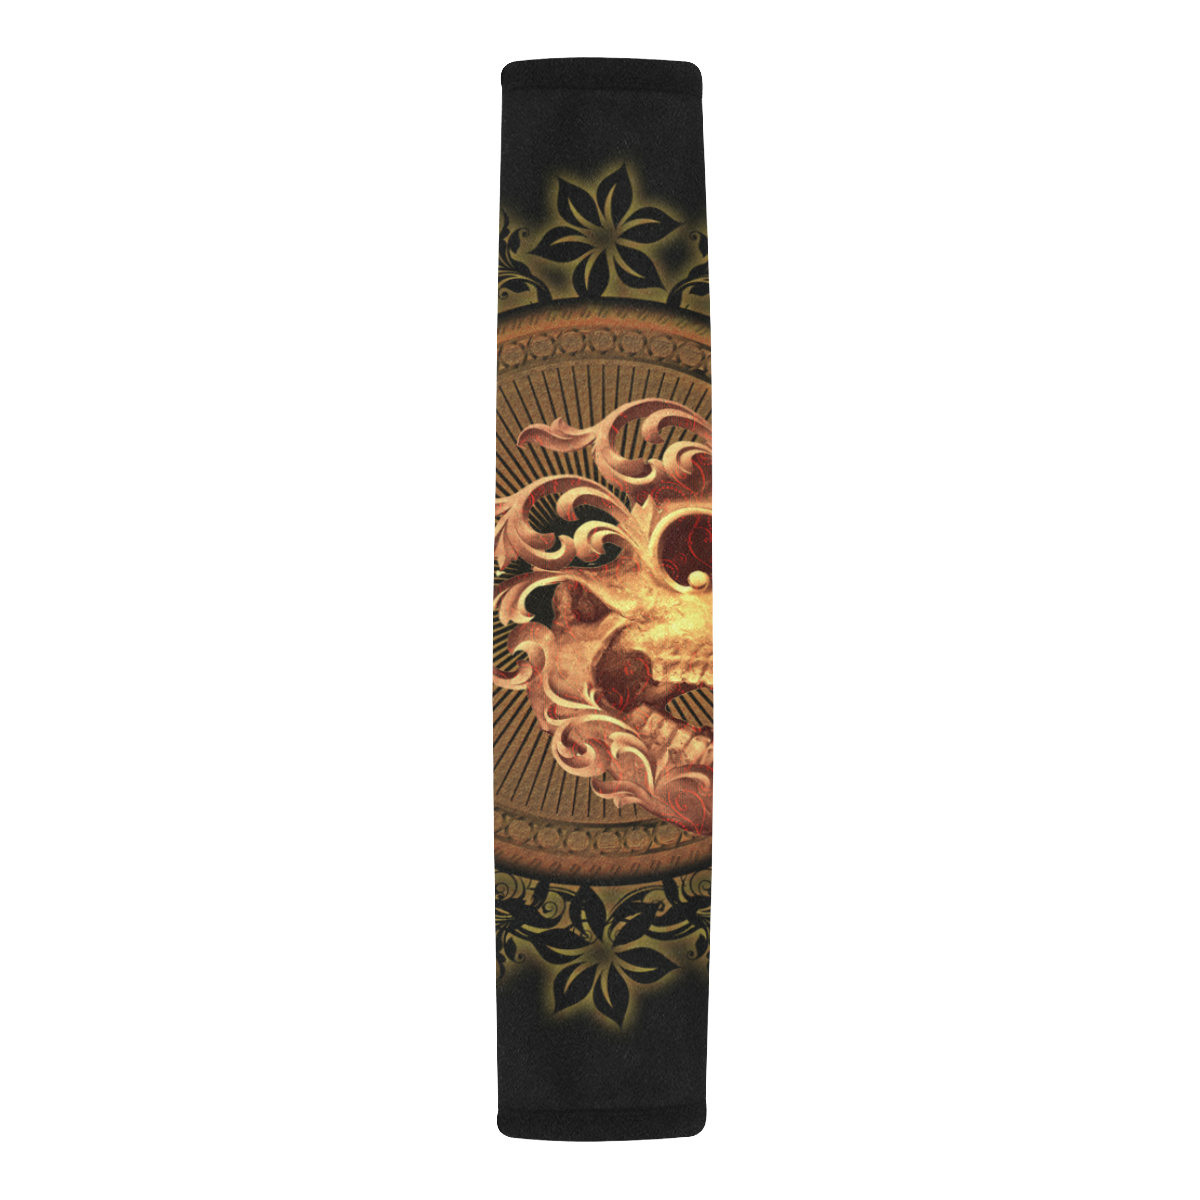 Amazing skull with floral elements Car Seat Belt Cover 7''x12.6''